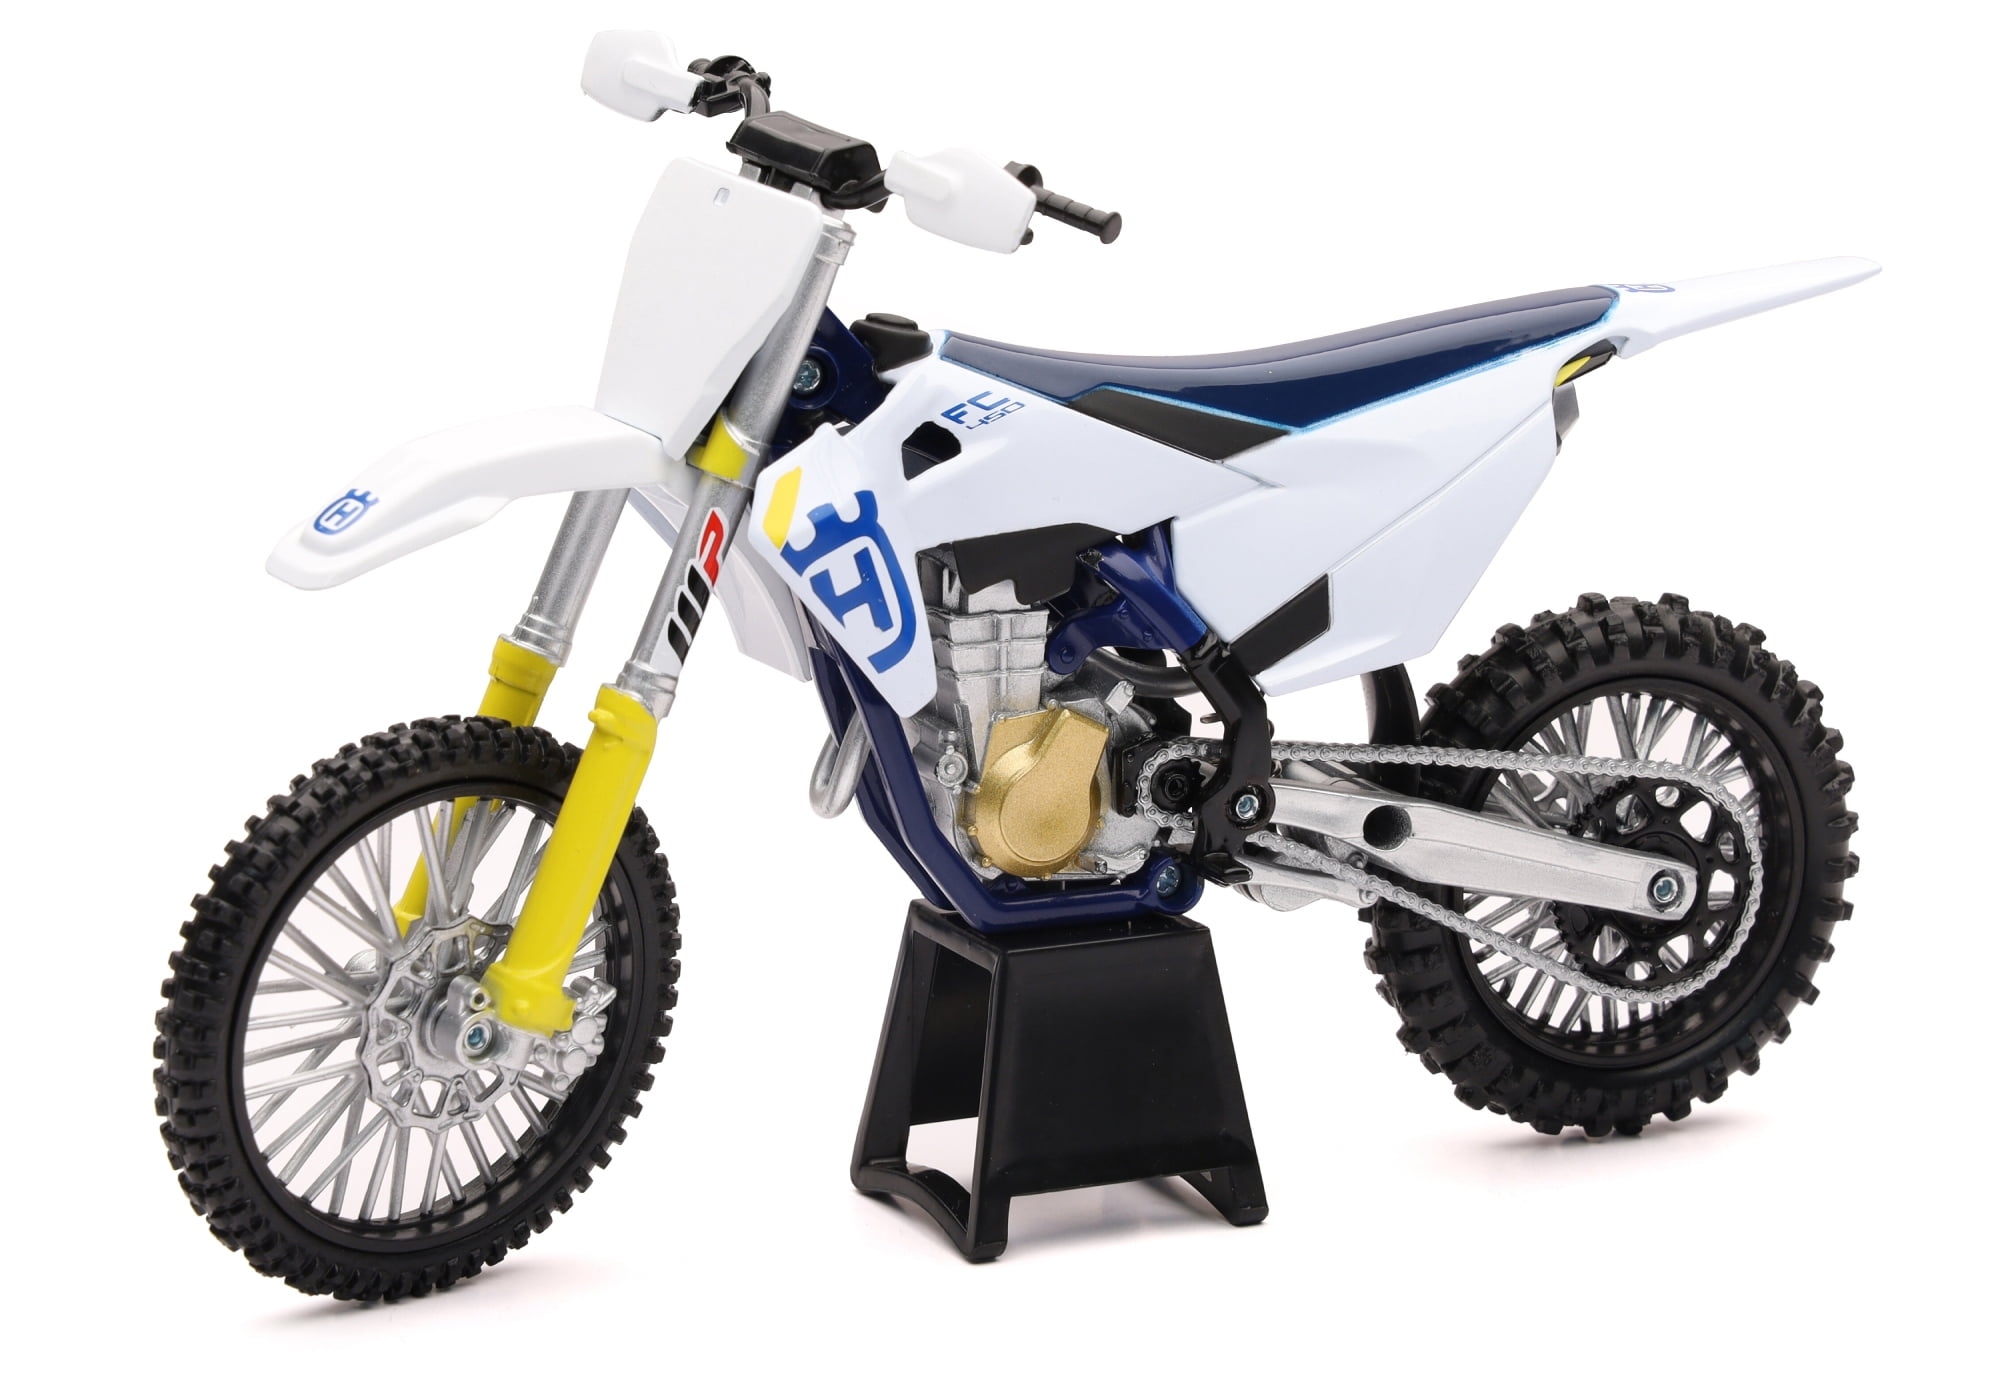 Yamaha YZ450F 2017 1/12 Motorcycle Model Dirt Bike Toy by New Ray 57983 